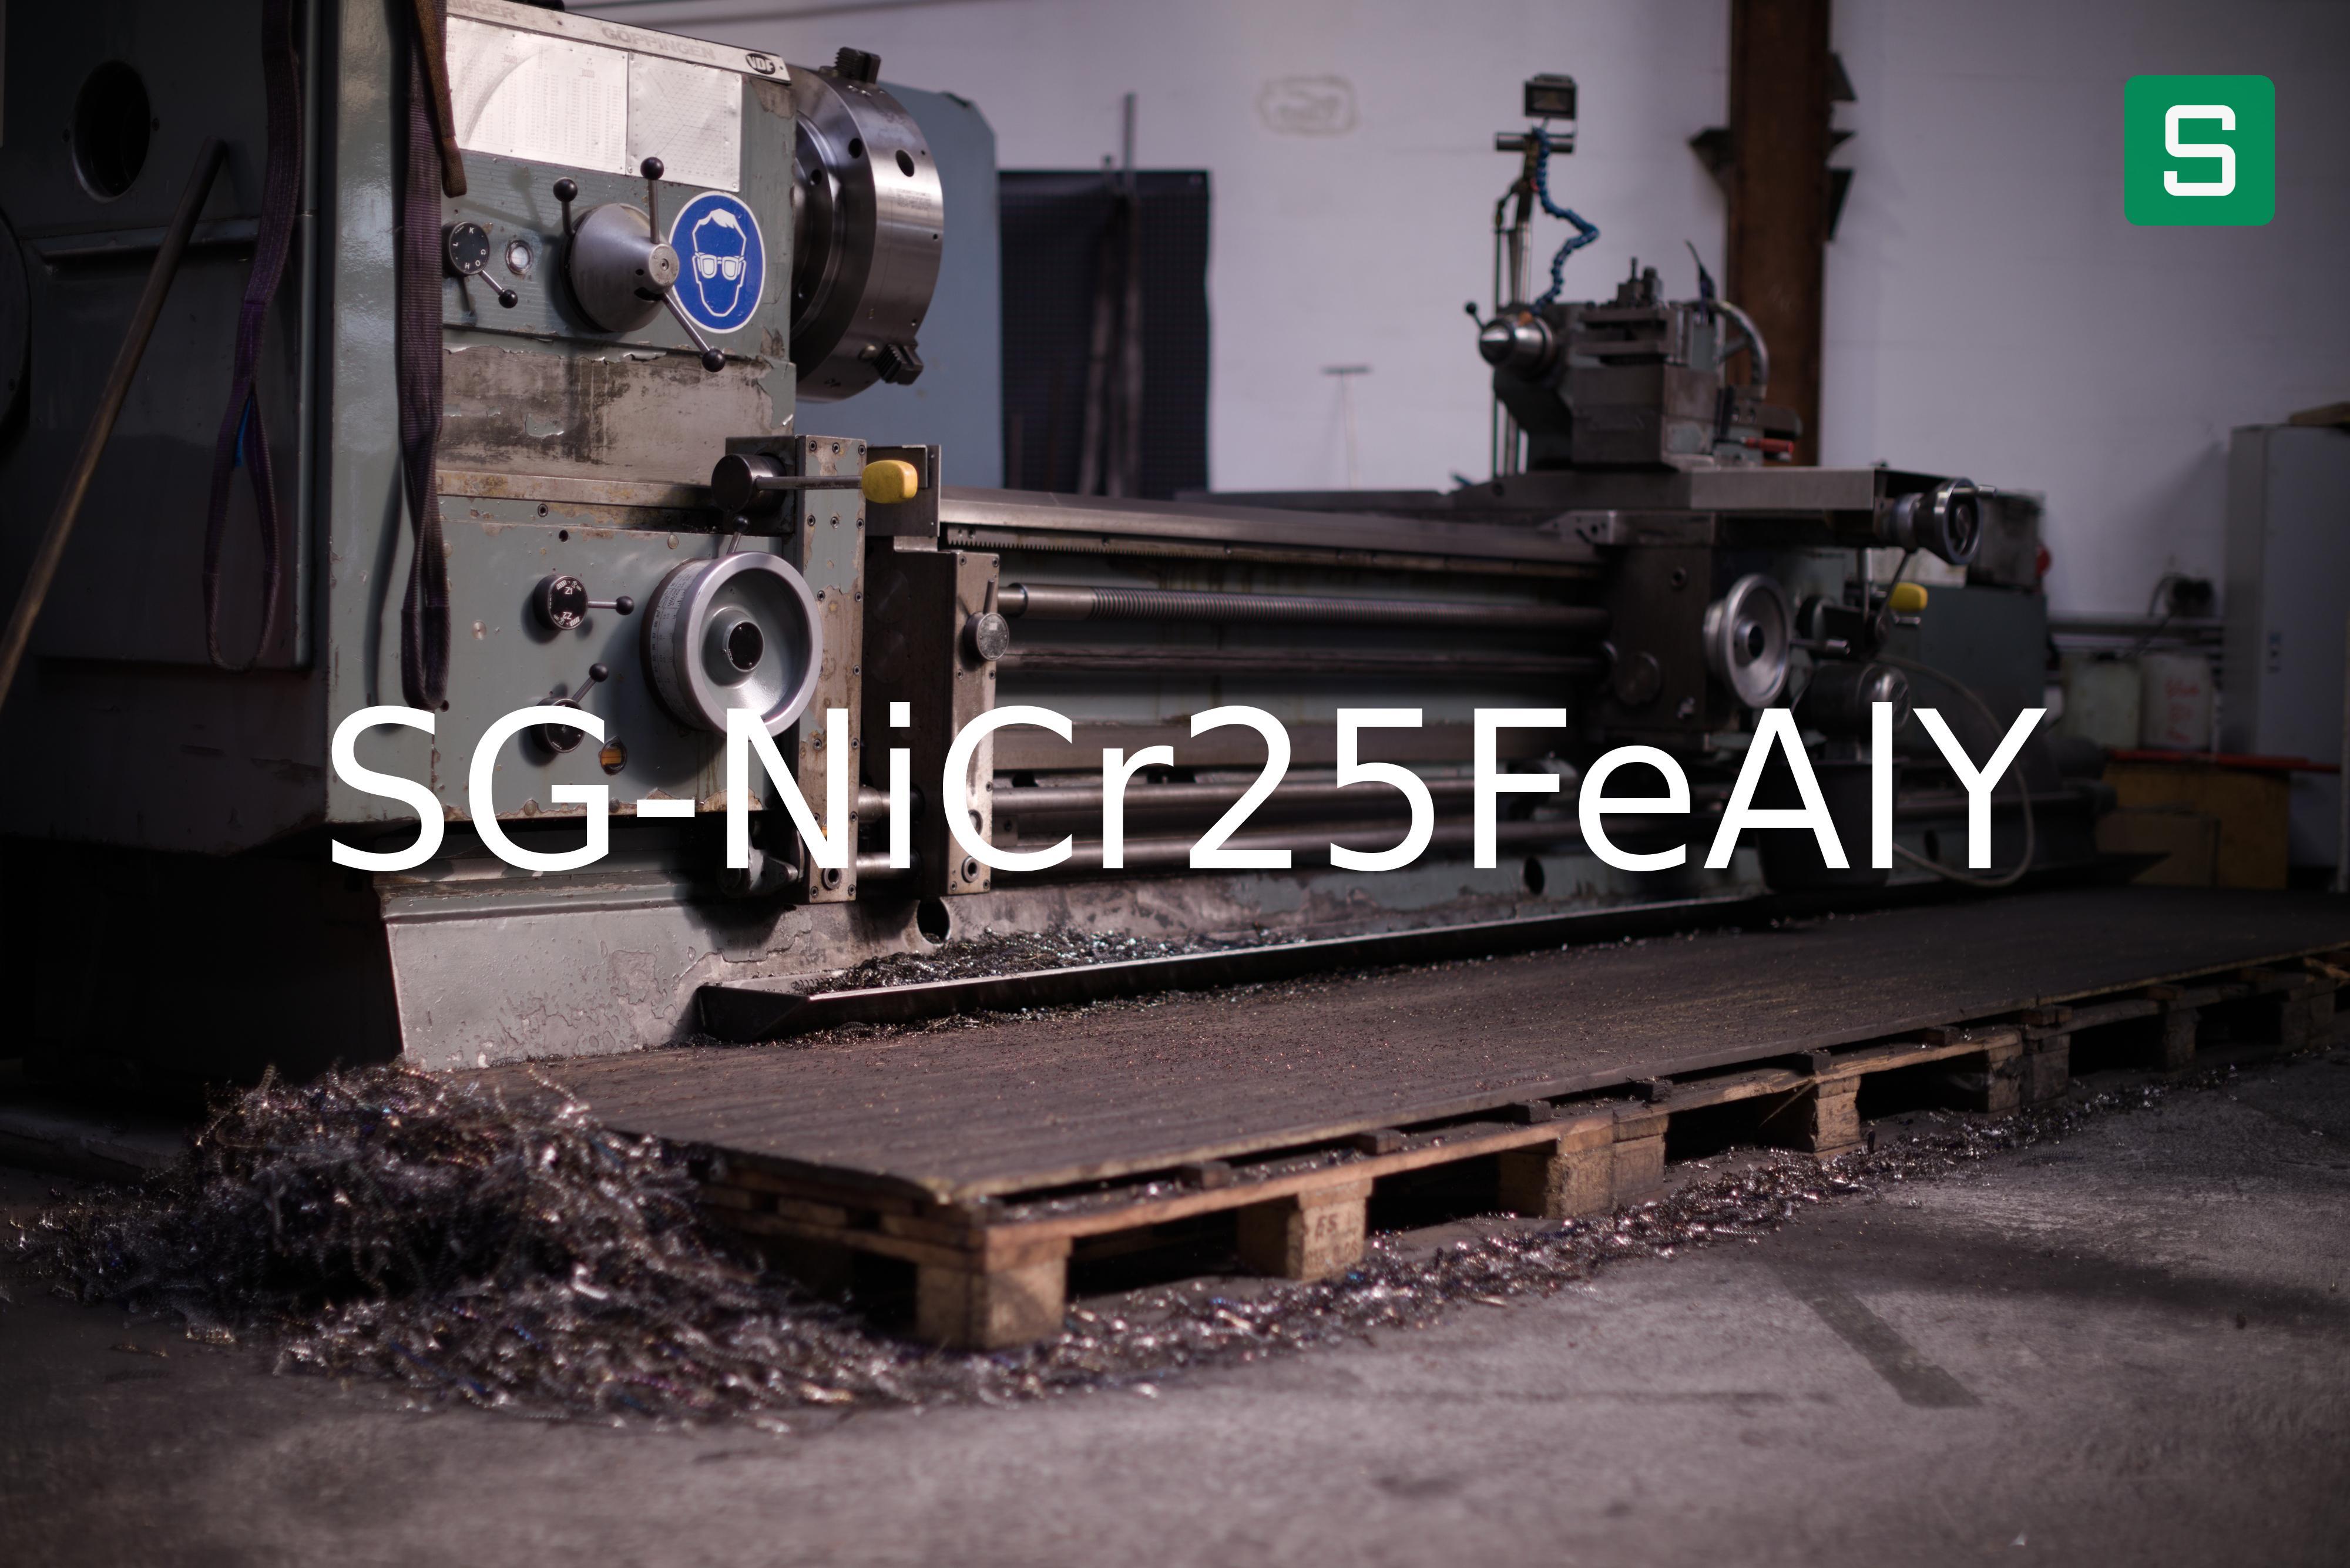 Steel Material: SG-NiCr25FeAlY